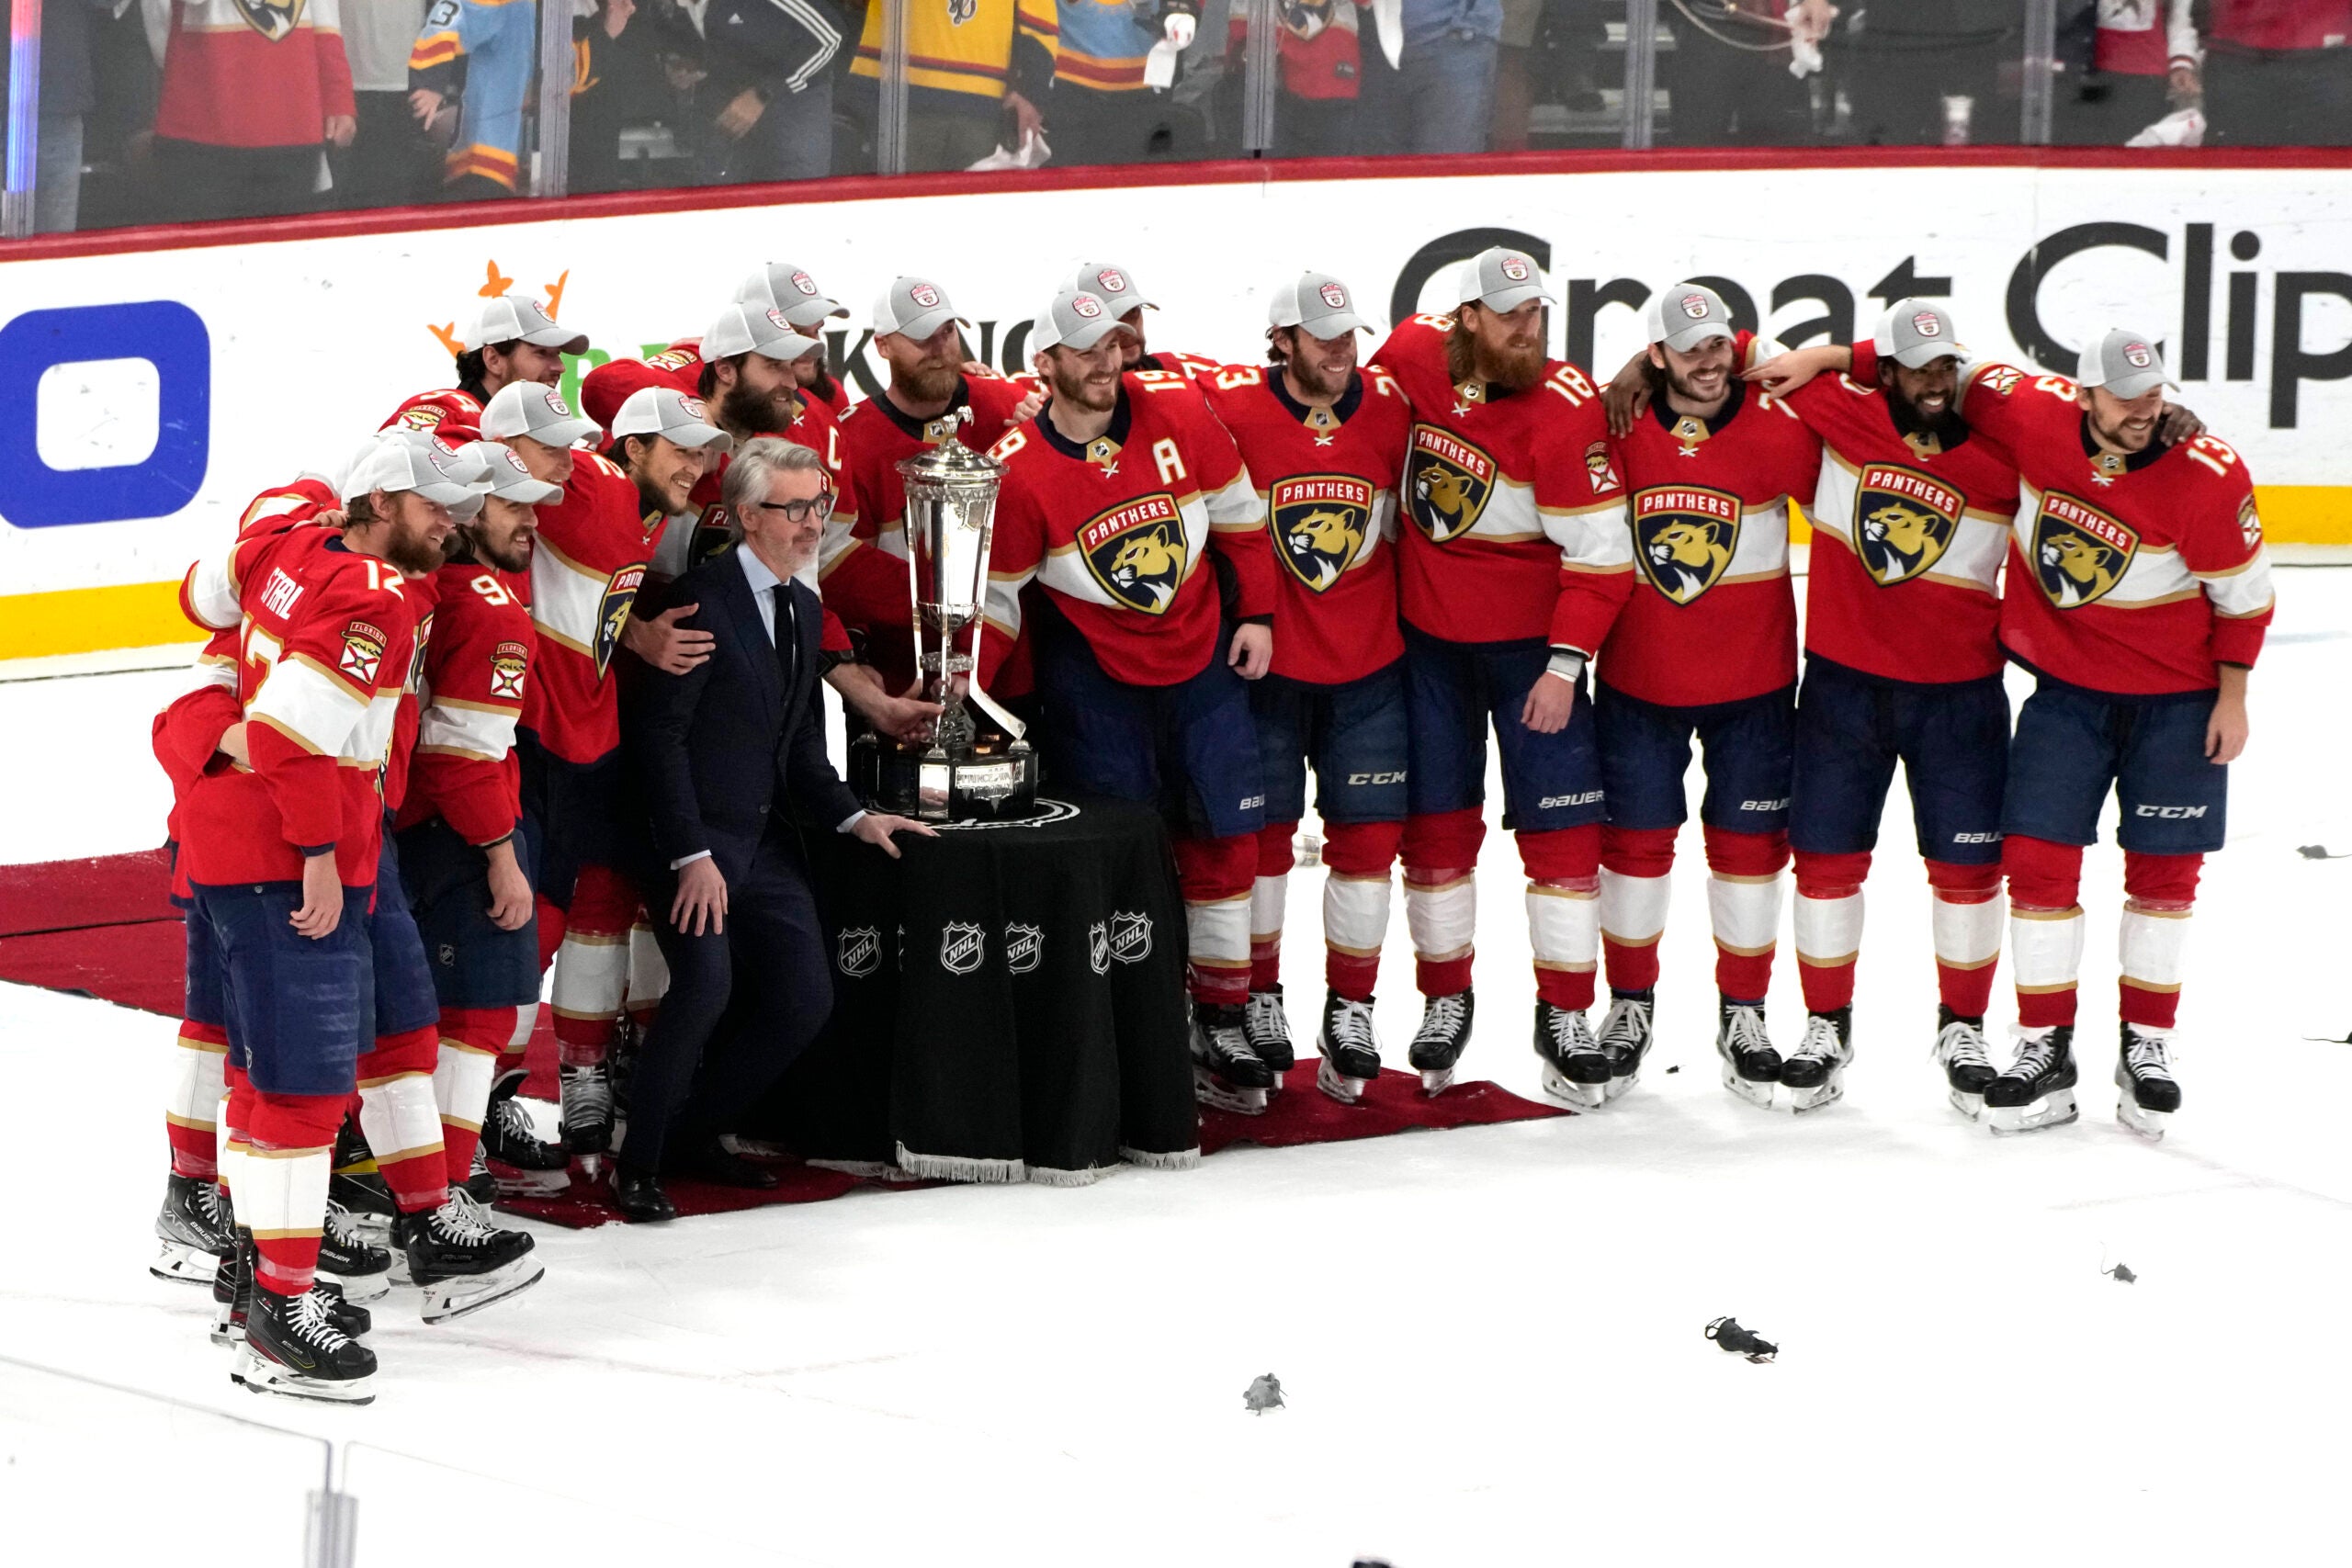 The Florida Panthers pose with the Prince of Wales trophy after winning Game 4 of the NHL hockey Stanley Cup Eastern Conference finals against the Carolina Hurricanes.